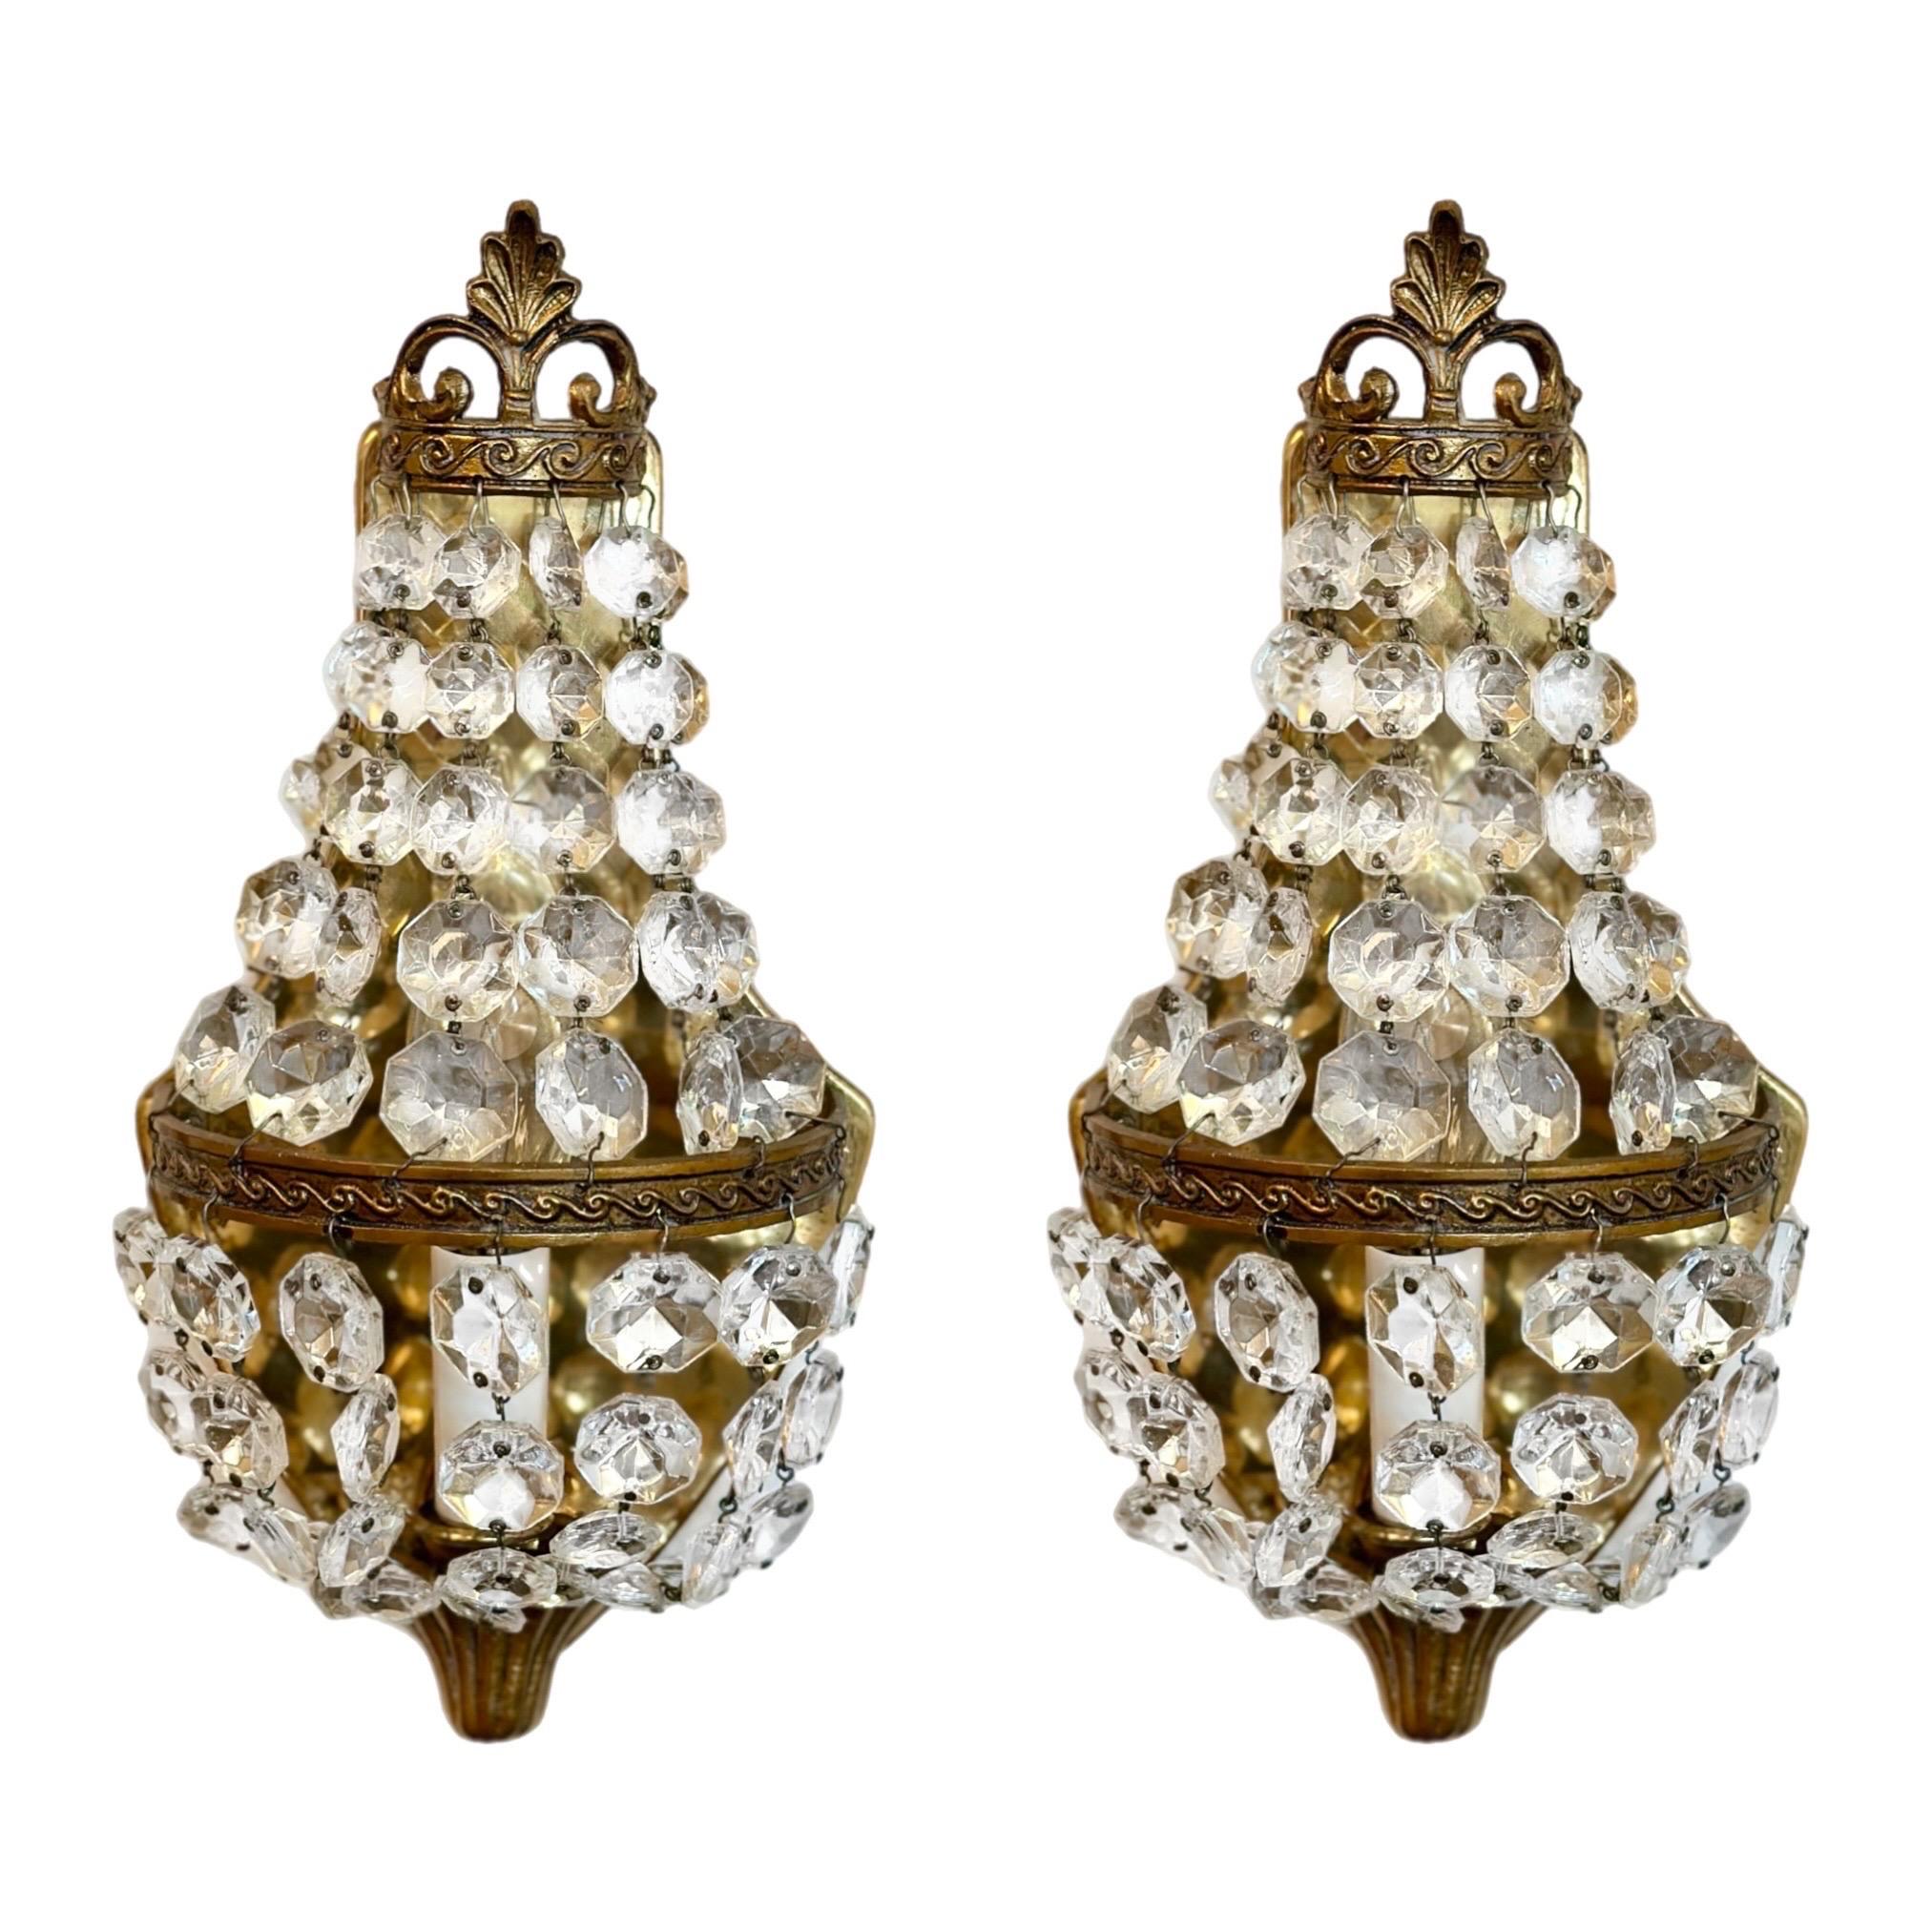 1920s Italian Empire Style Brass & Crystal Wall Sconces - a Pair For Sale